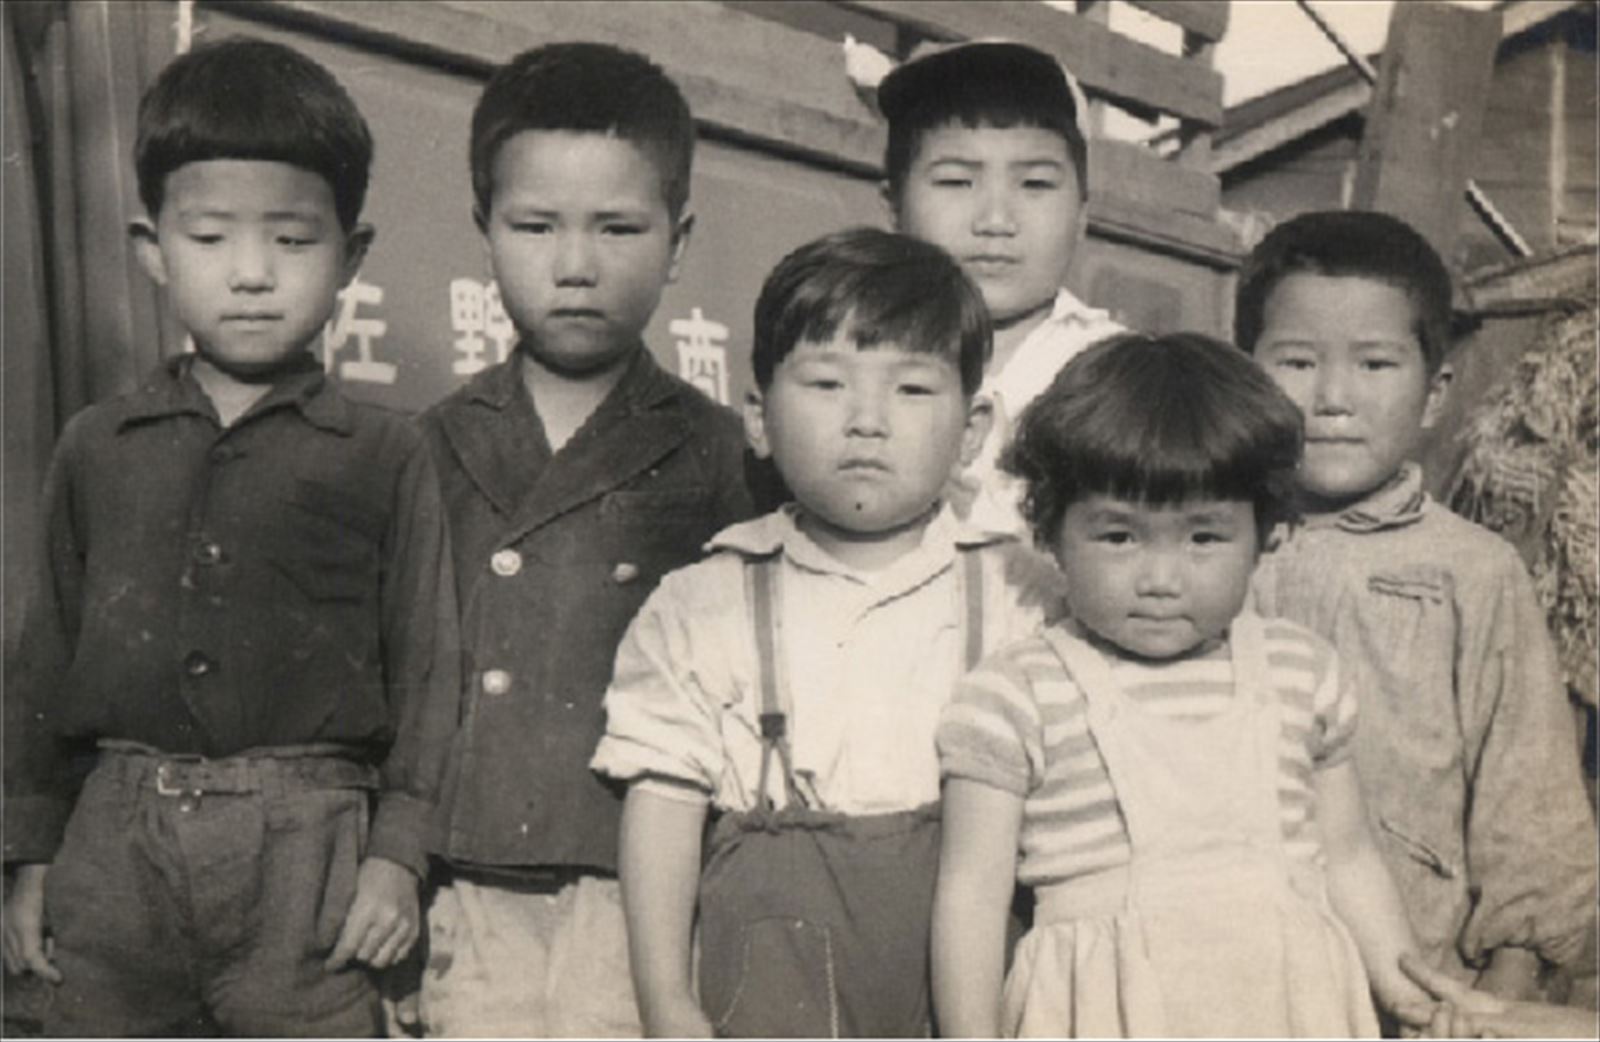 At that age he was called Bokko (junk) shop Tomikazu-kun (third from the left)